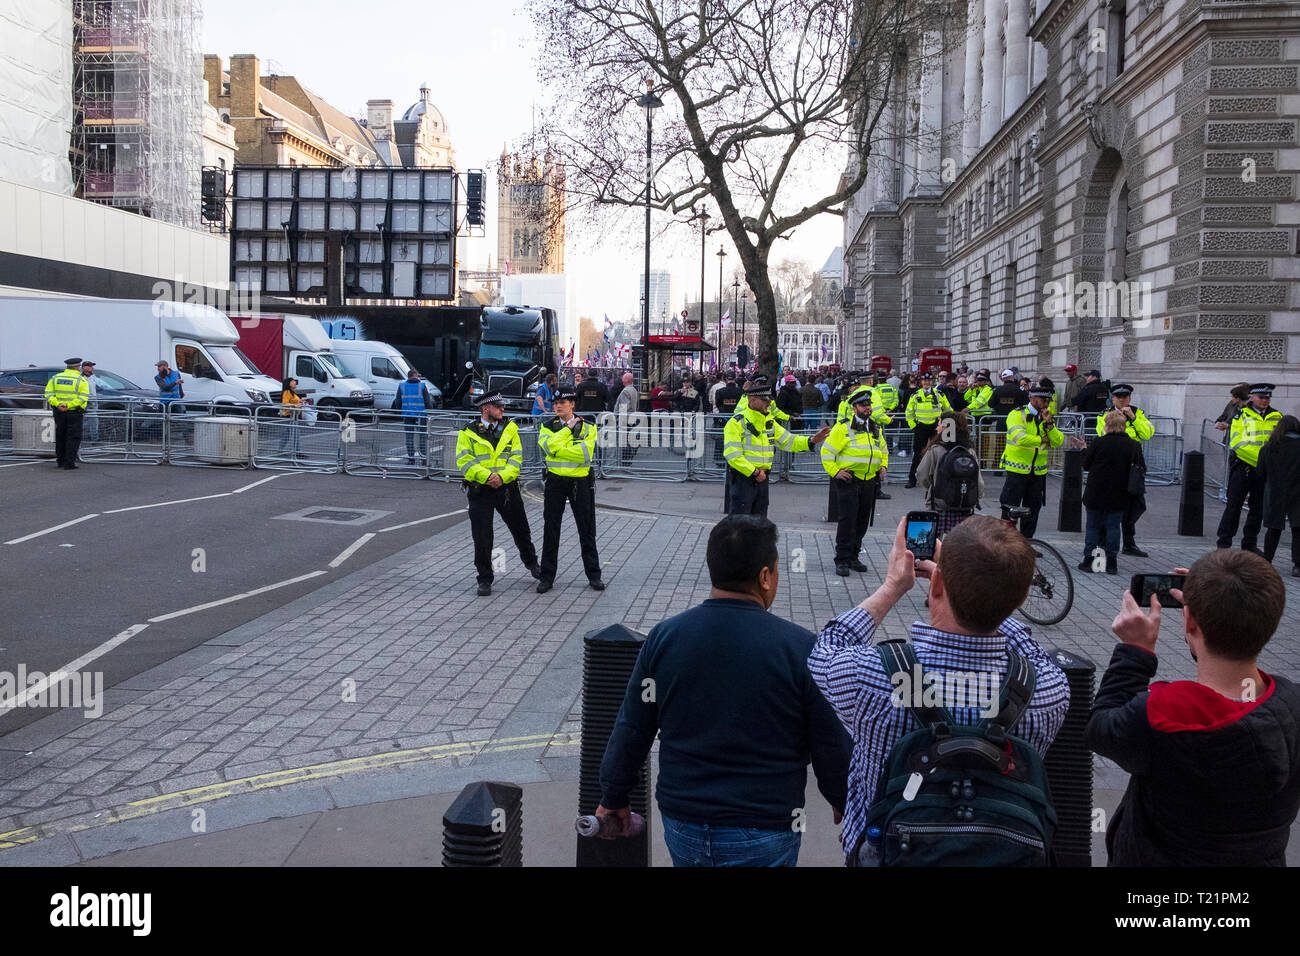 London, UK. 29th March 2019, the day the UK was due to leave the EU. There was some trouble later outside Downing Street but earlier at 5pm secure police cordons restricted access along Whitehall in both directions creating a sterile zone.  Tourists are taking photos before being ushered away. Credit: Scott Hortop/Alamy Live News. Stock Photo